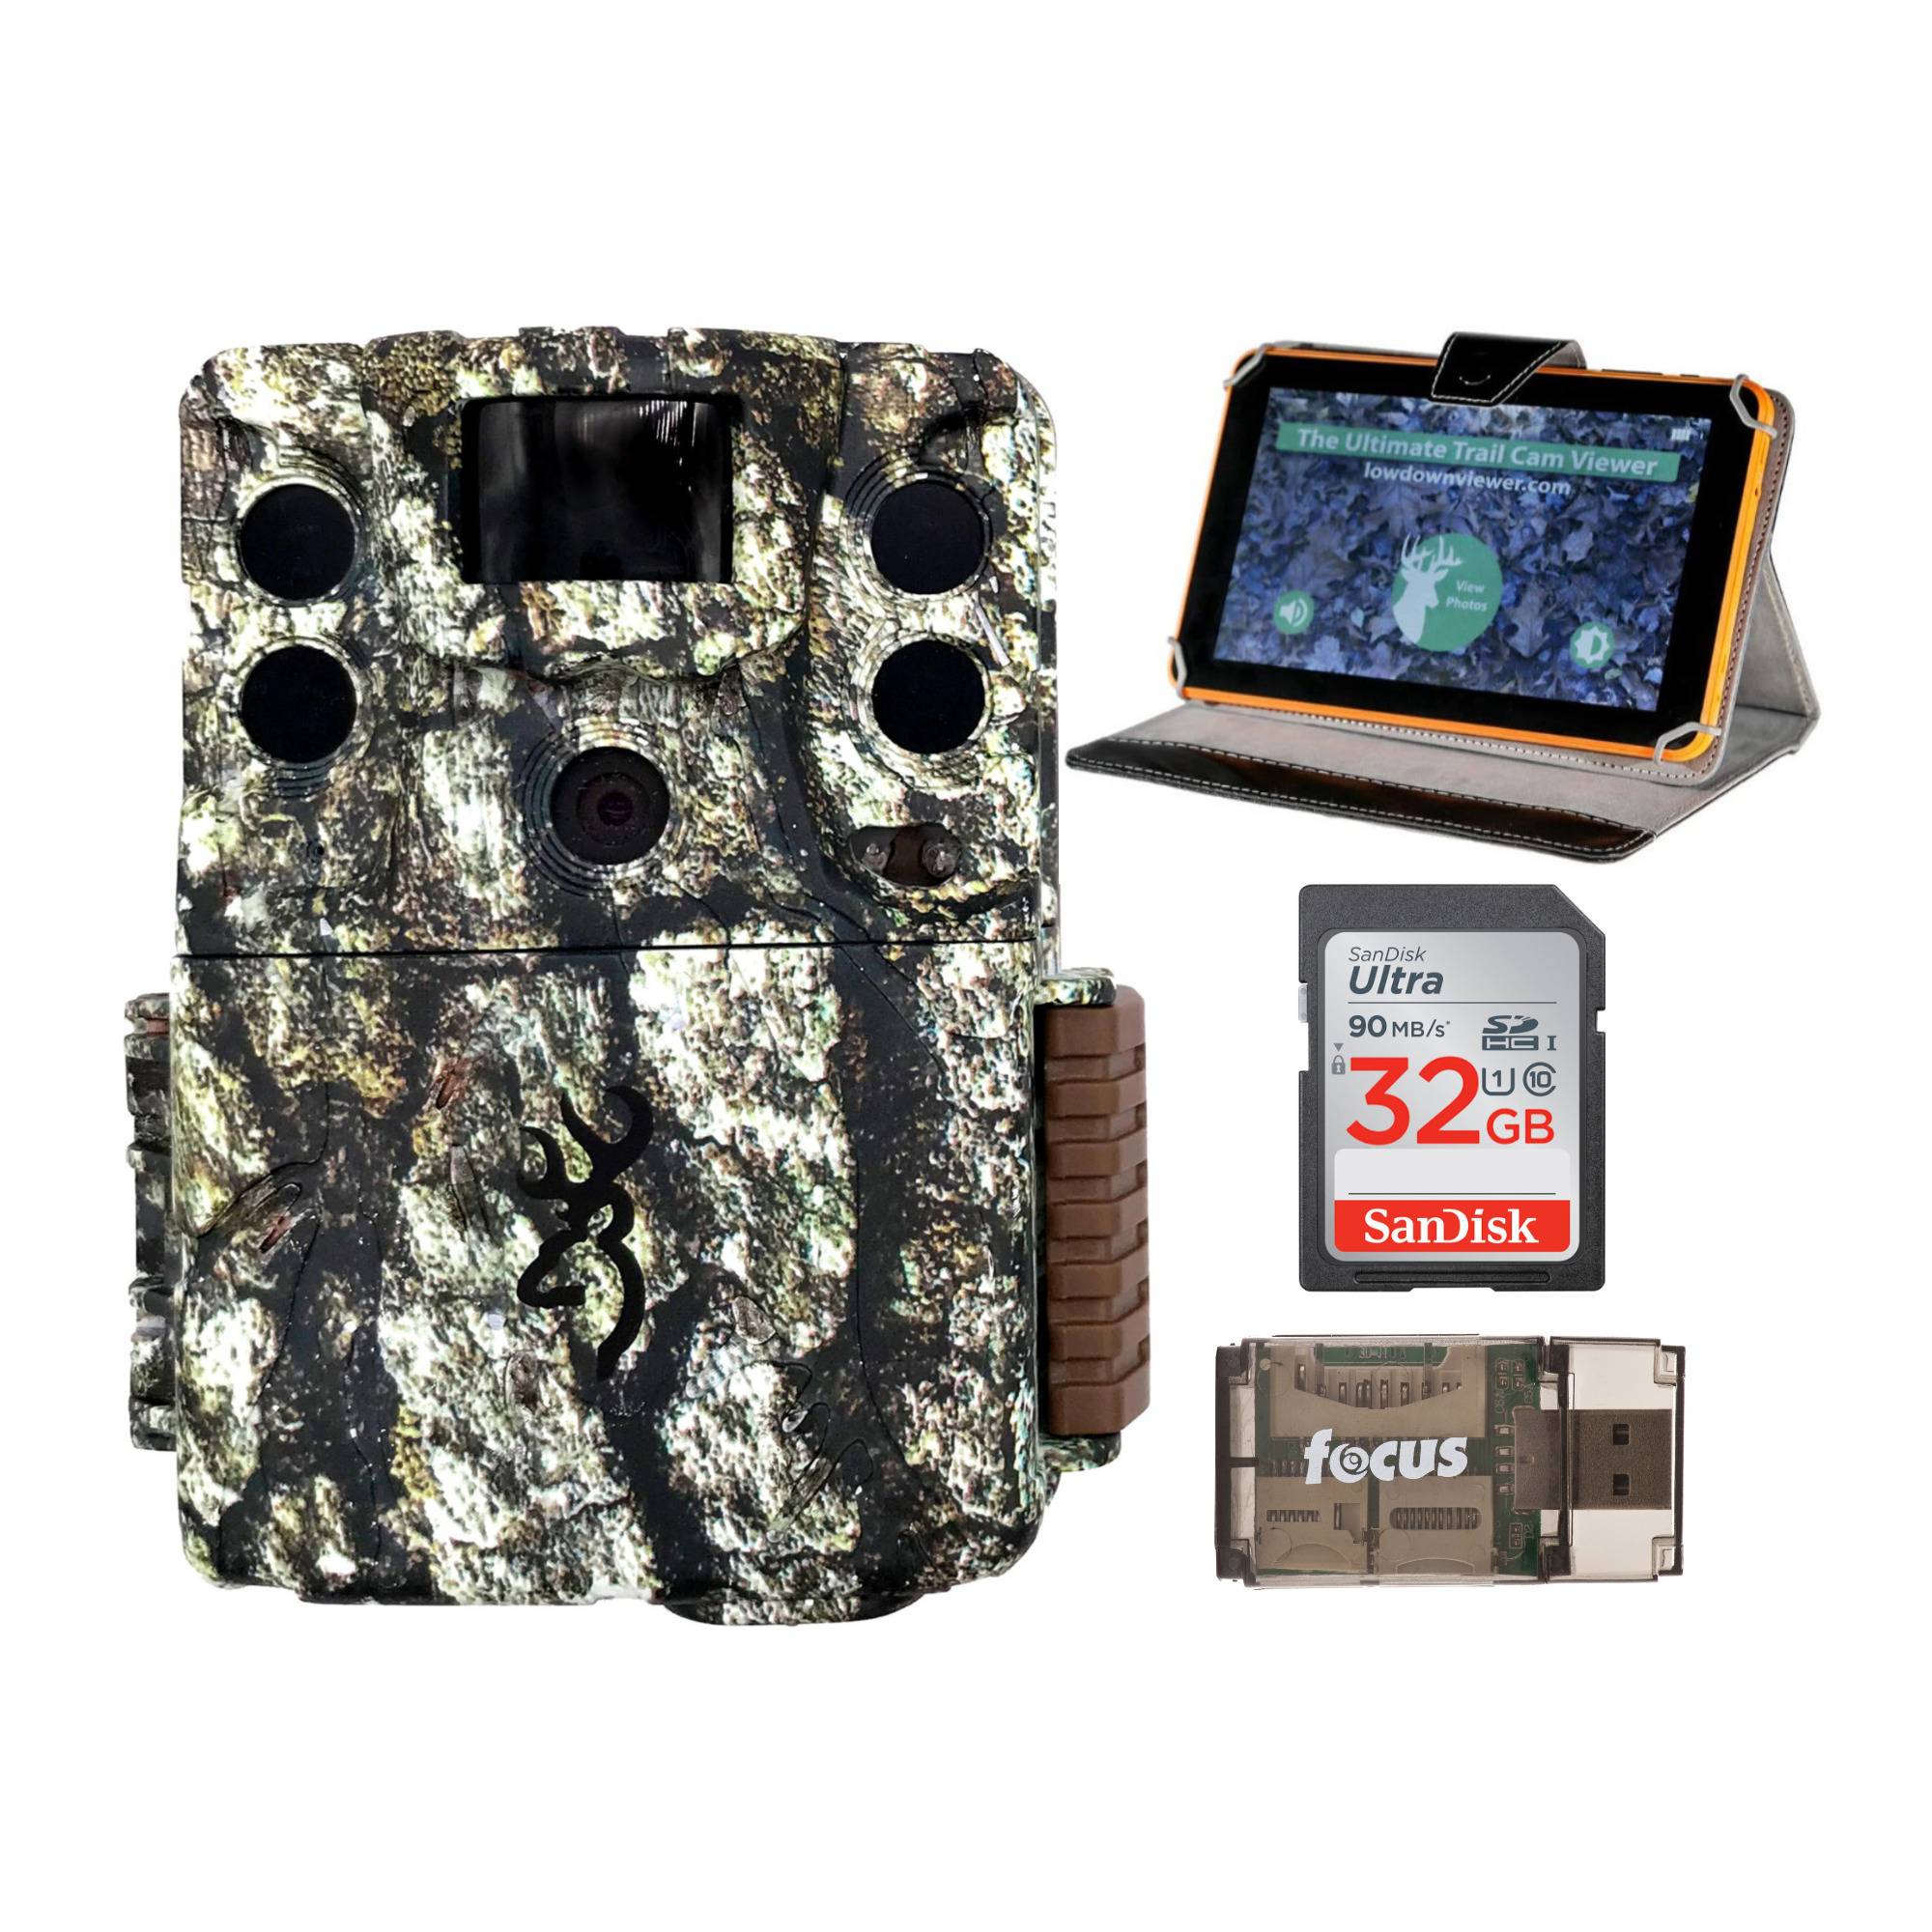 Browning Trail Cameras Command Ops Elite 18MP Trail Camera with Image and Video Viewer, 32GB SD Card, and Card Reader